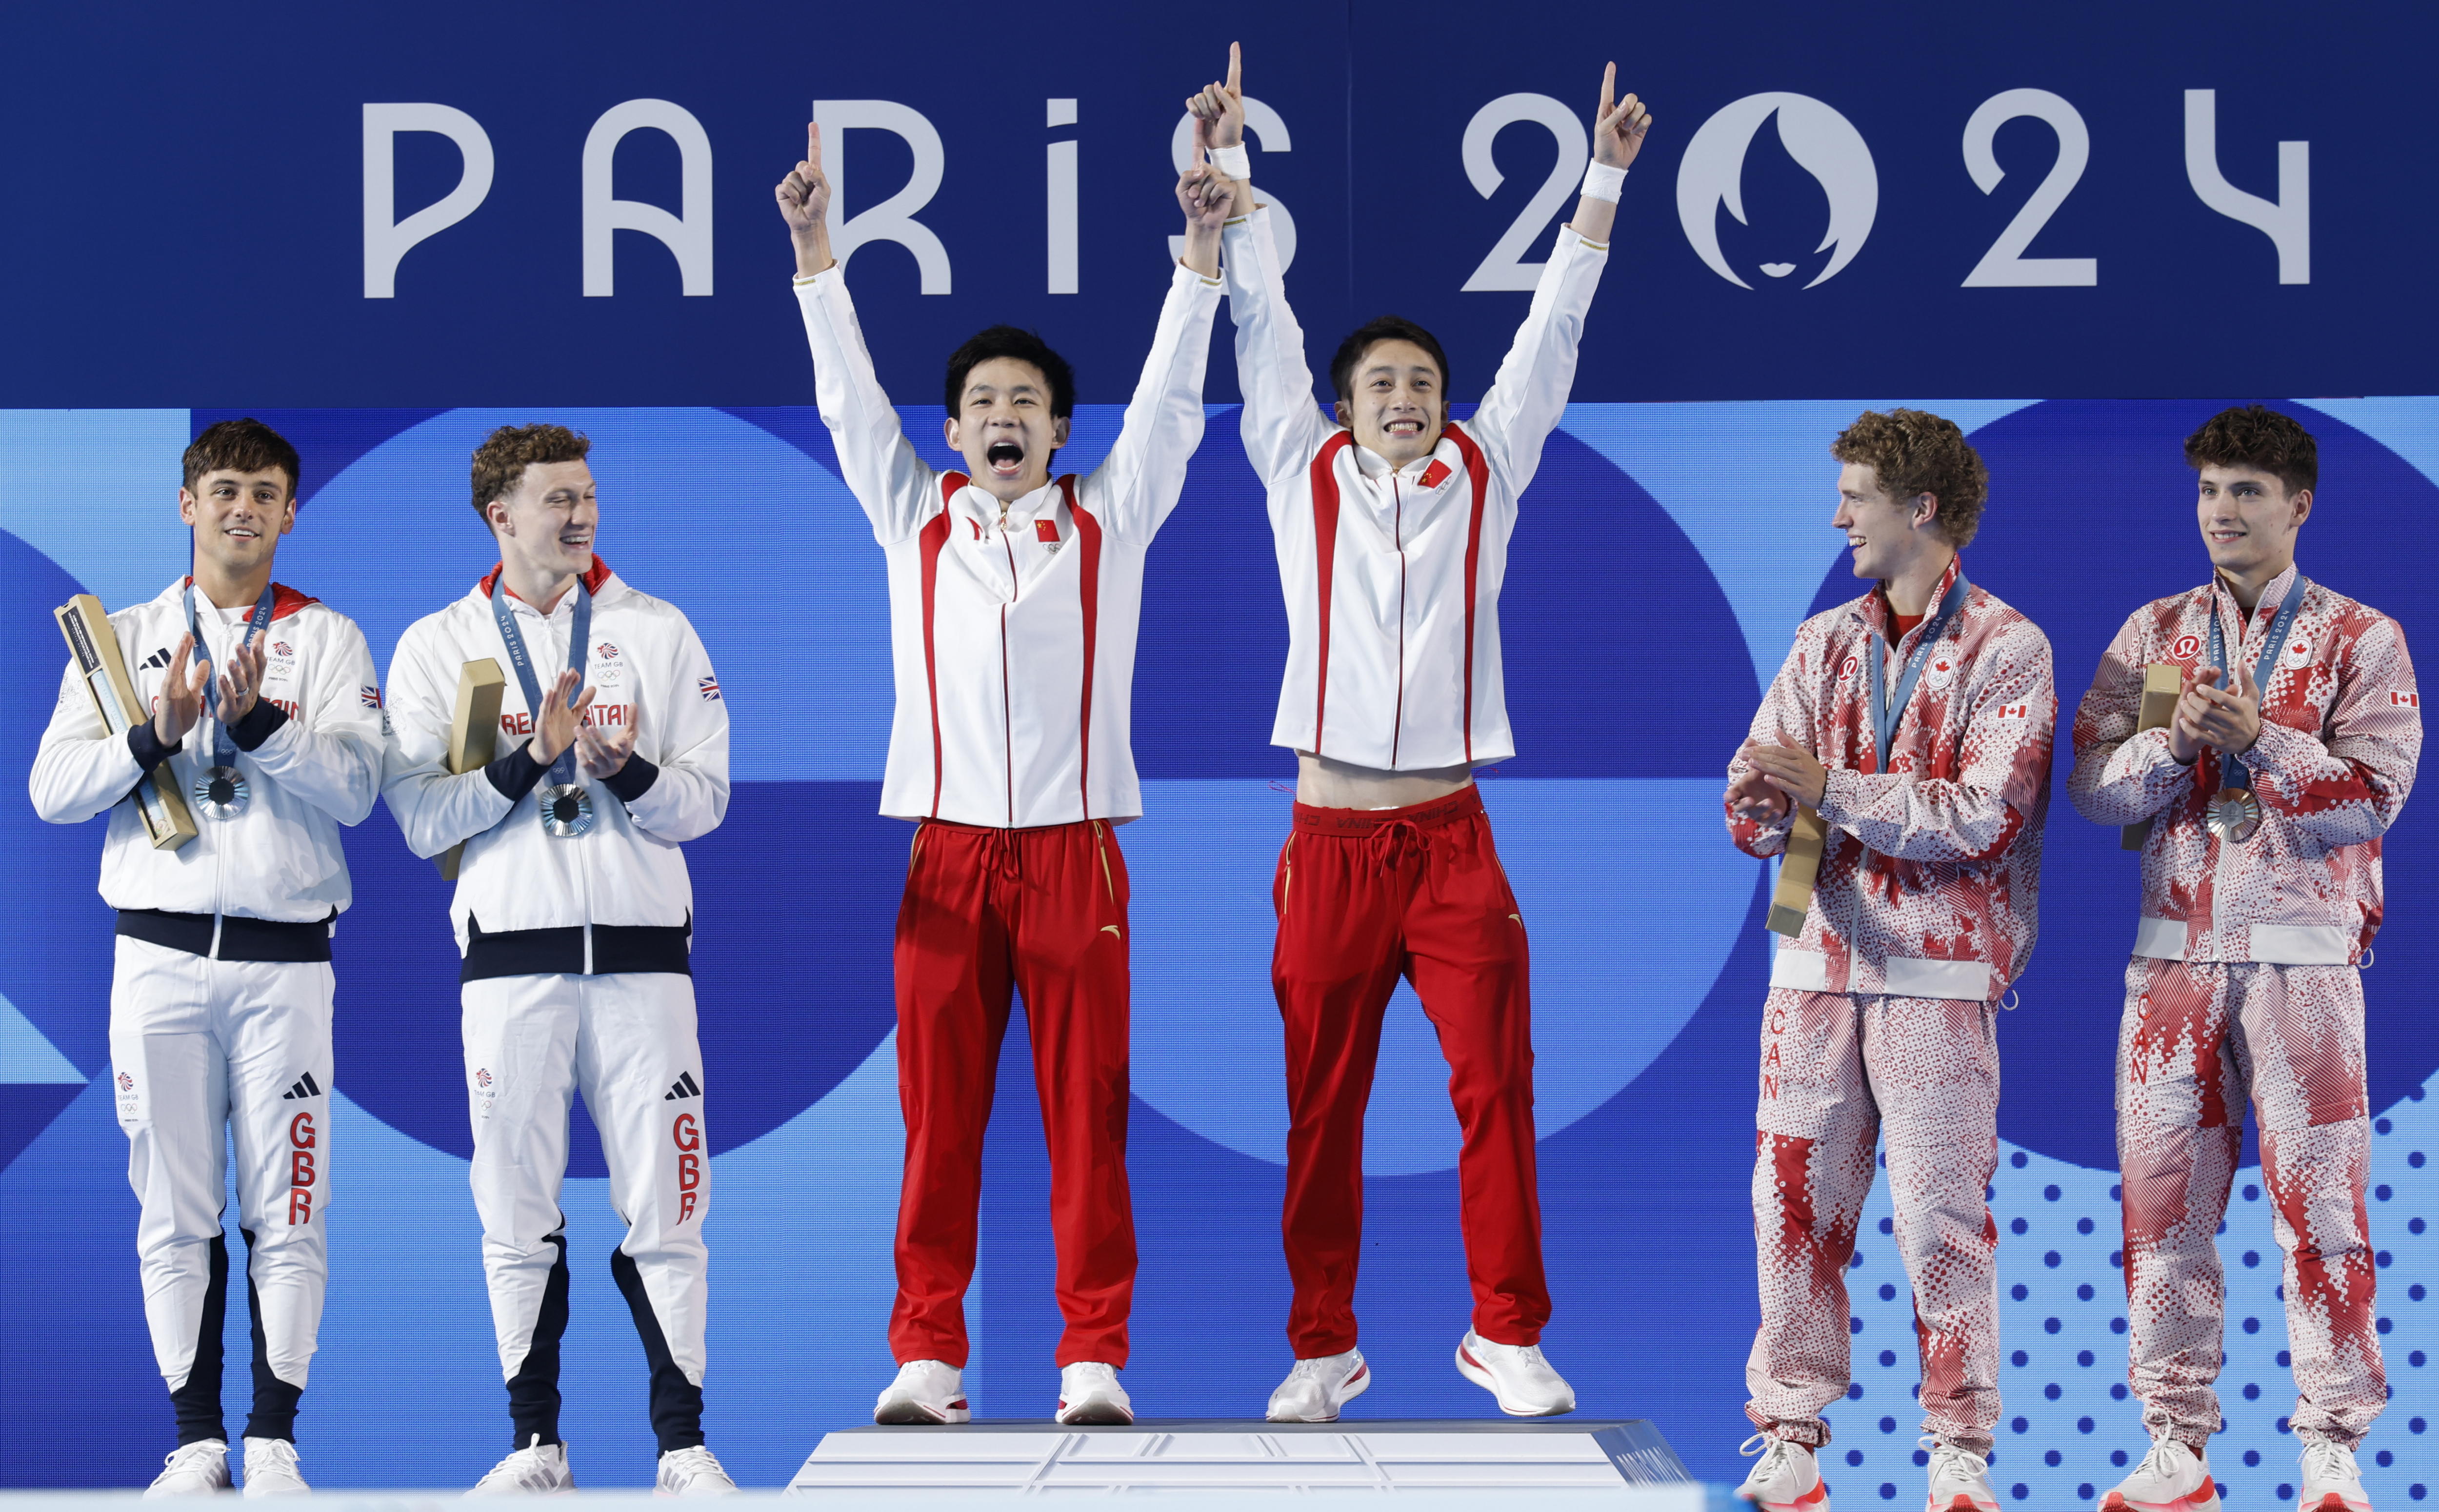 Saint-denis (France), 29/07/2024.- (L-R) Silver medalists Thomas Daley and Noah Williams of Great Britain, Gold medalists Lian Junjie and Yang Hao of China and Bronze medalists Rylan Wiens and Nathan Zsombor-murray of Canada celebrate with their medals following the Men's Synchronised 10m Platform Final of the Diving competitions in the Paris 2024 Olympic Games, at the Aquatics Centre in Saint Denis, France, 29 July 2024.  (Francia, Gran Bretaña, Reino Unido) EFE/EPA/CAROLINE BREHMAN
